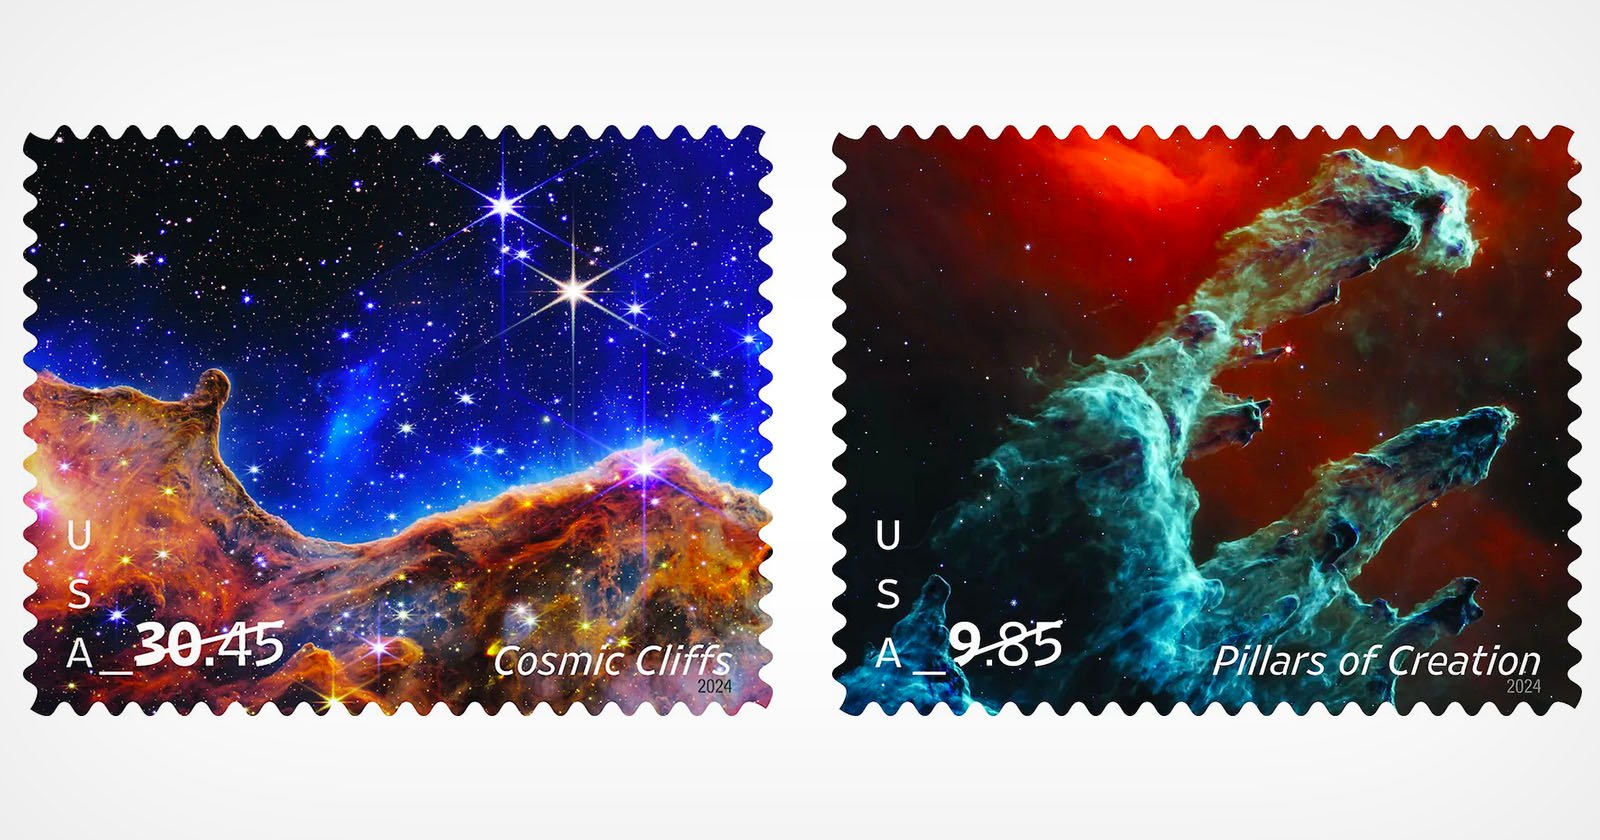 NASA and Postal Service Team Up for Commemorative Webb Photo Stamps